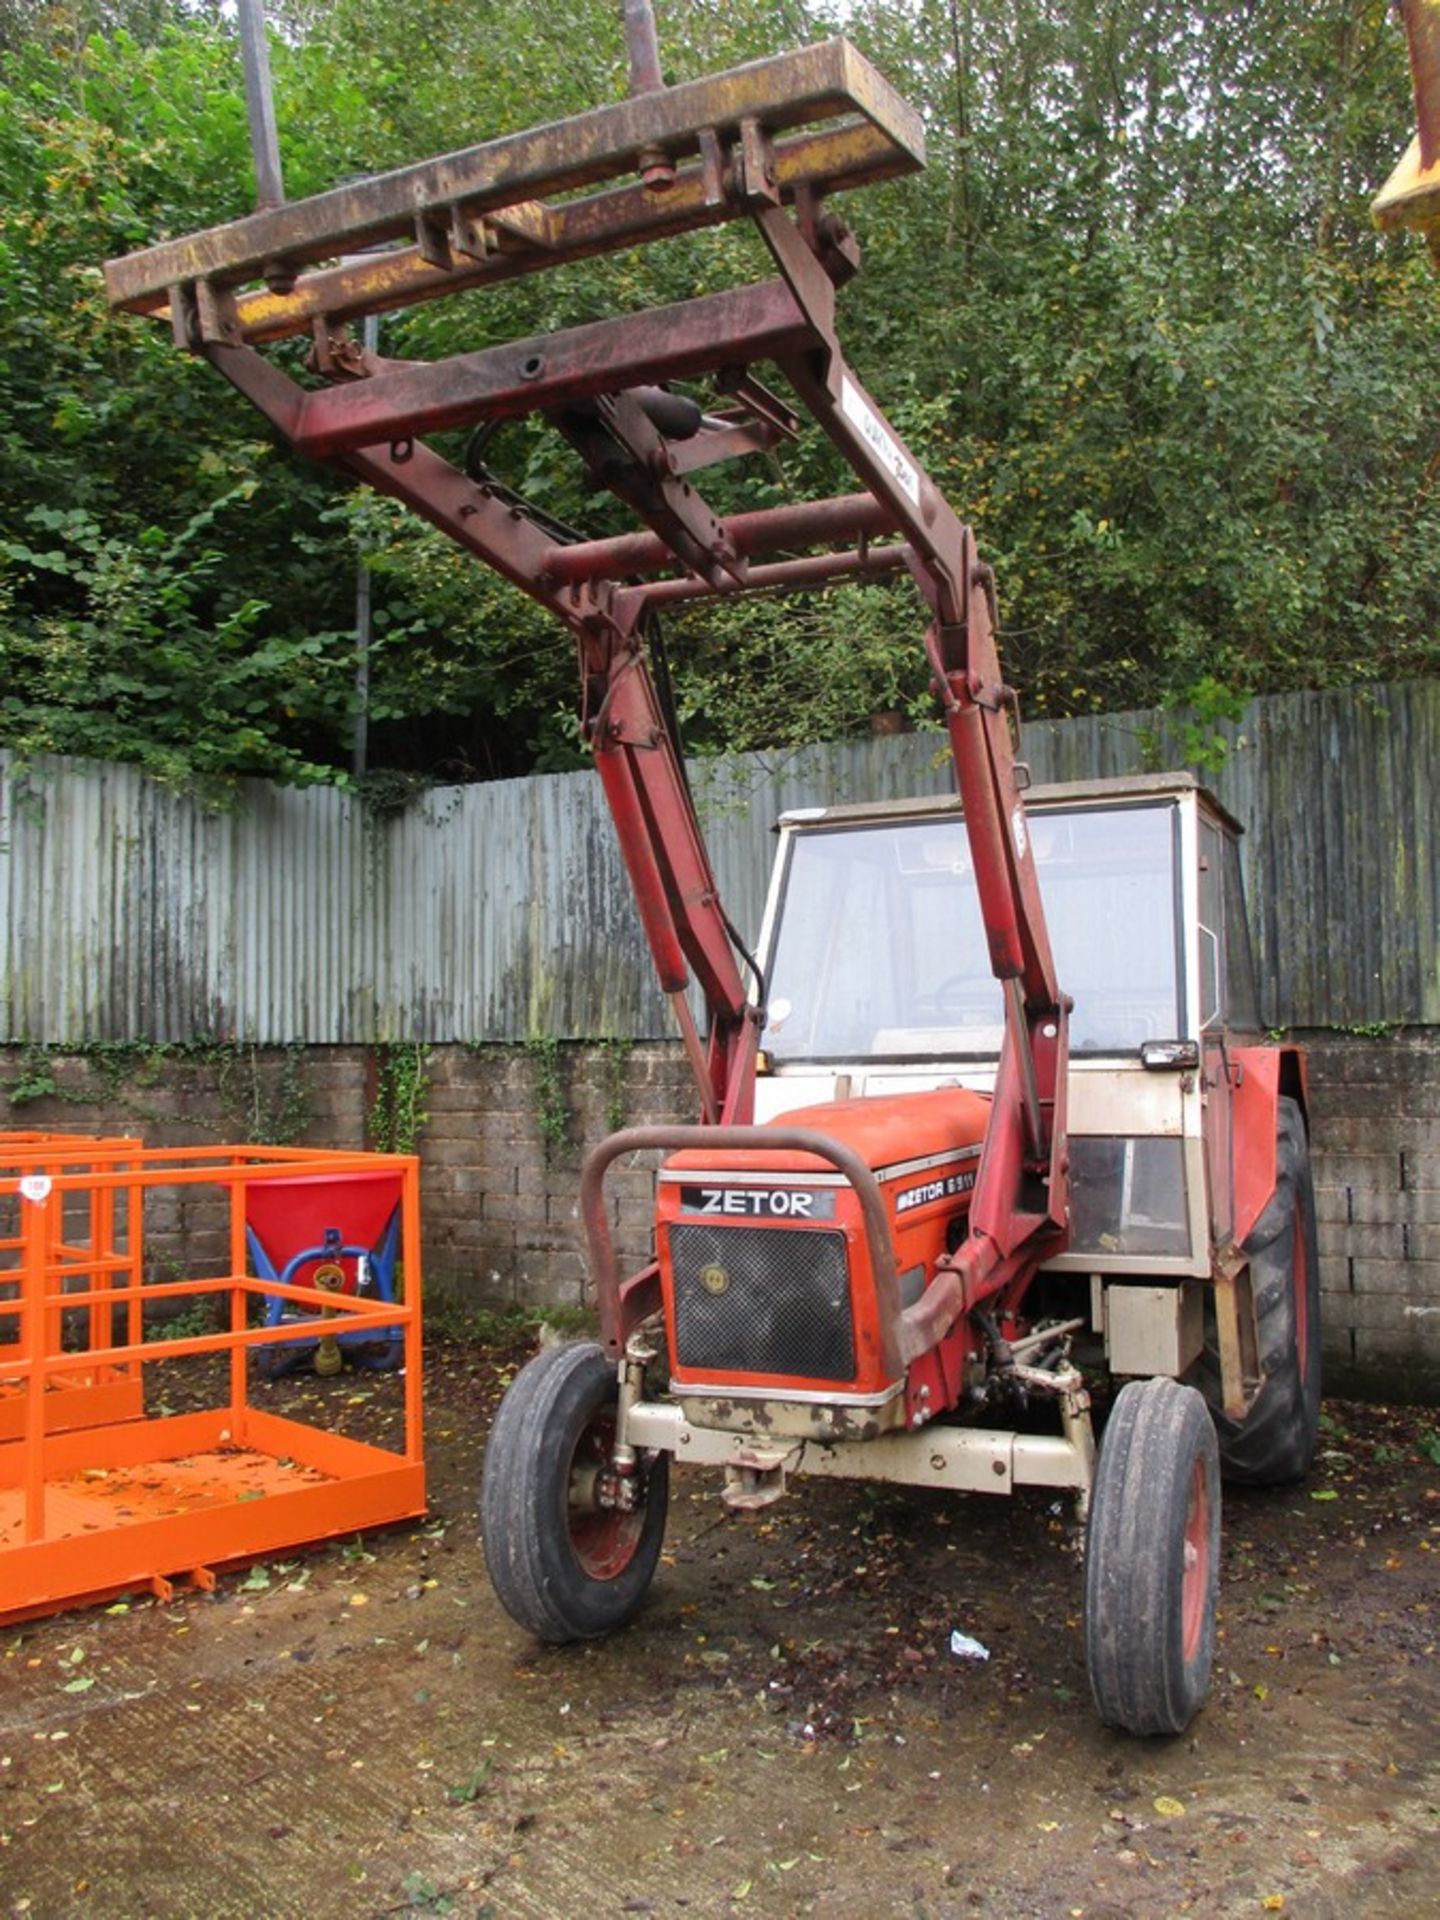 ZETOR 6911 TRACTOR C/W QUICKE LOADER & SPIKE, REAR END WEIGHT BLOCK JDC918W 0231HRS - Image 8 of 8